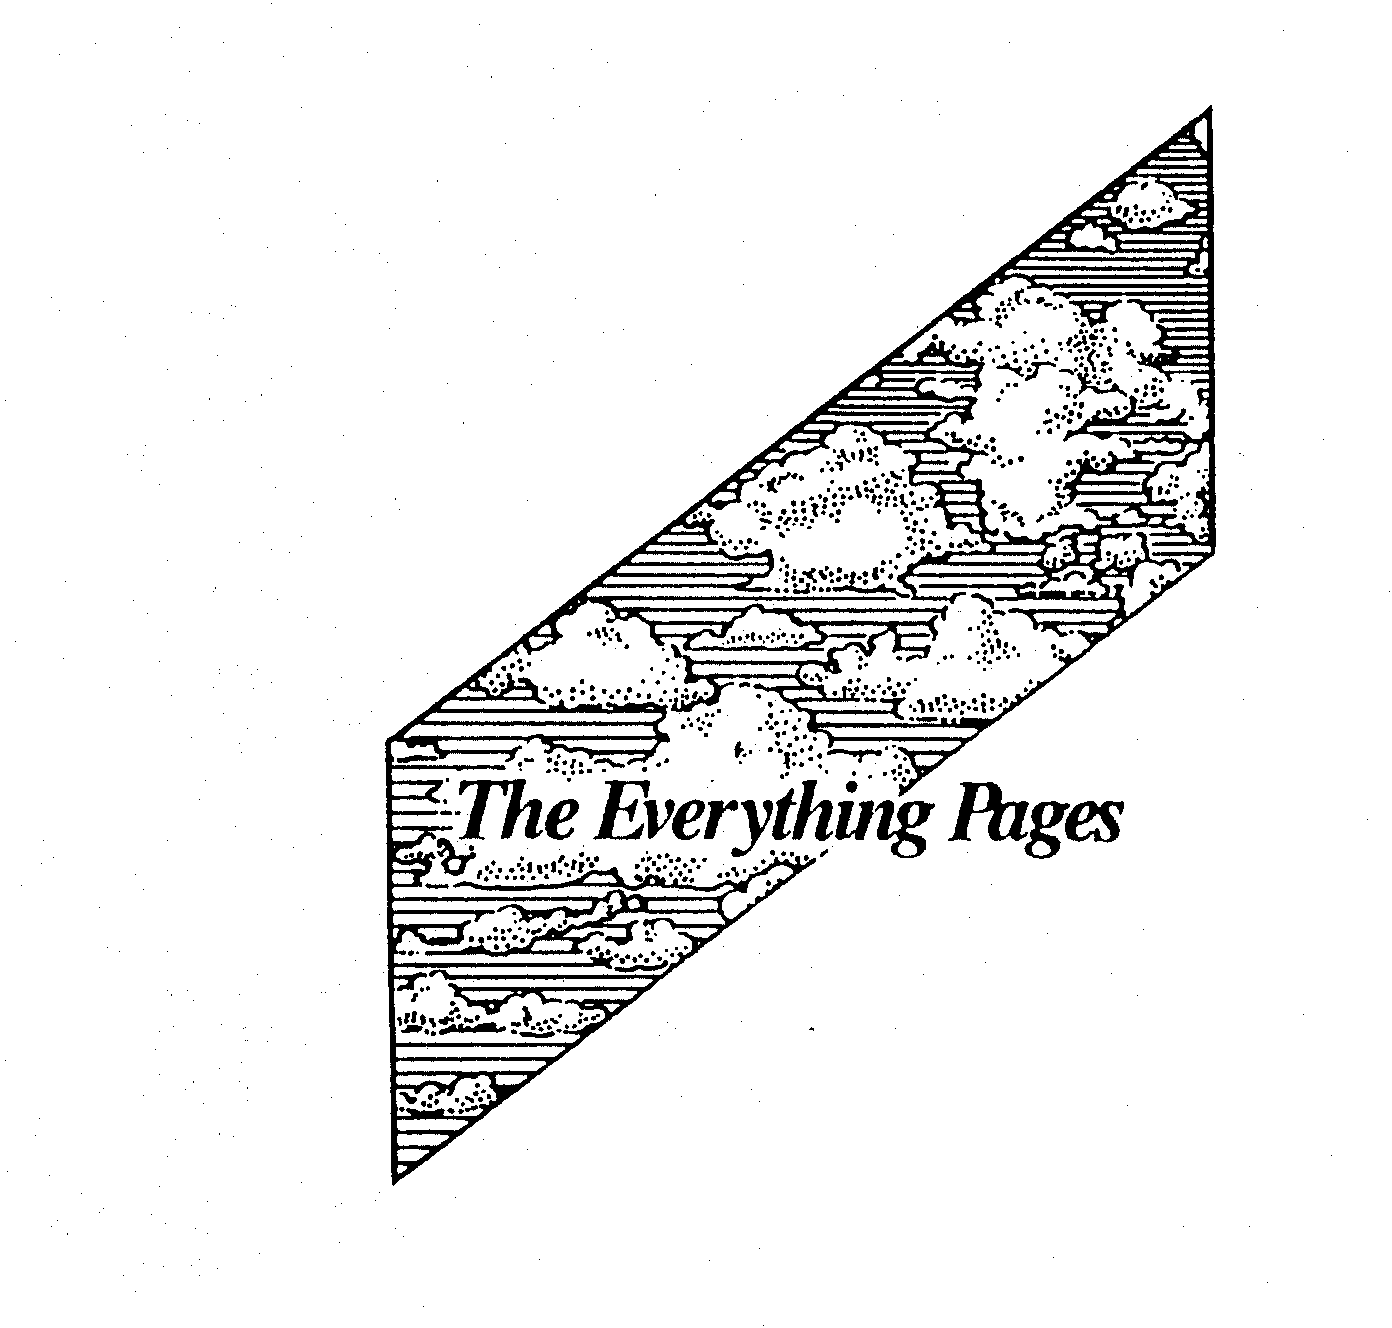  THE EVERYTHING PAGES